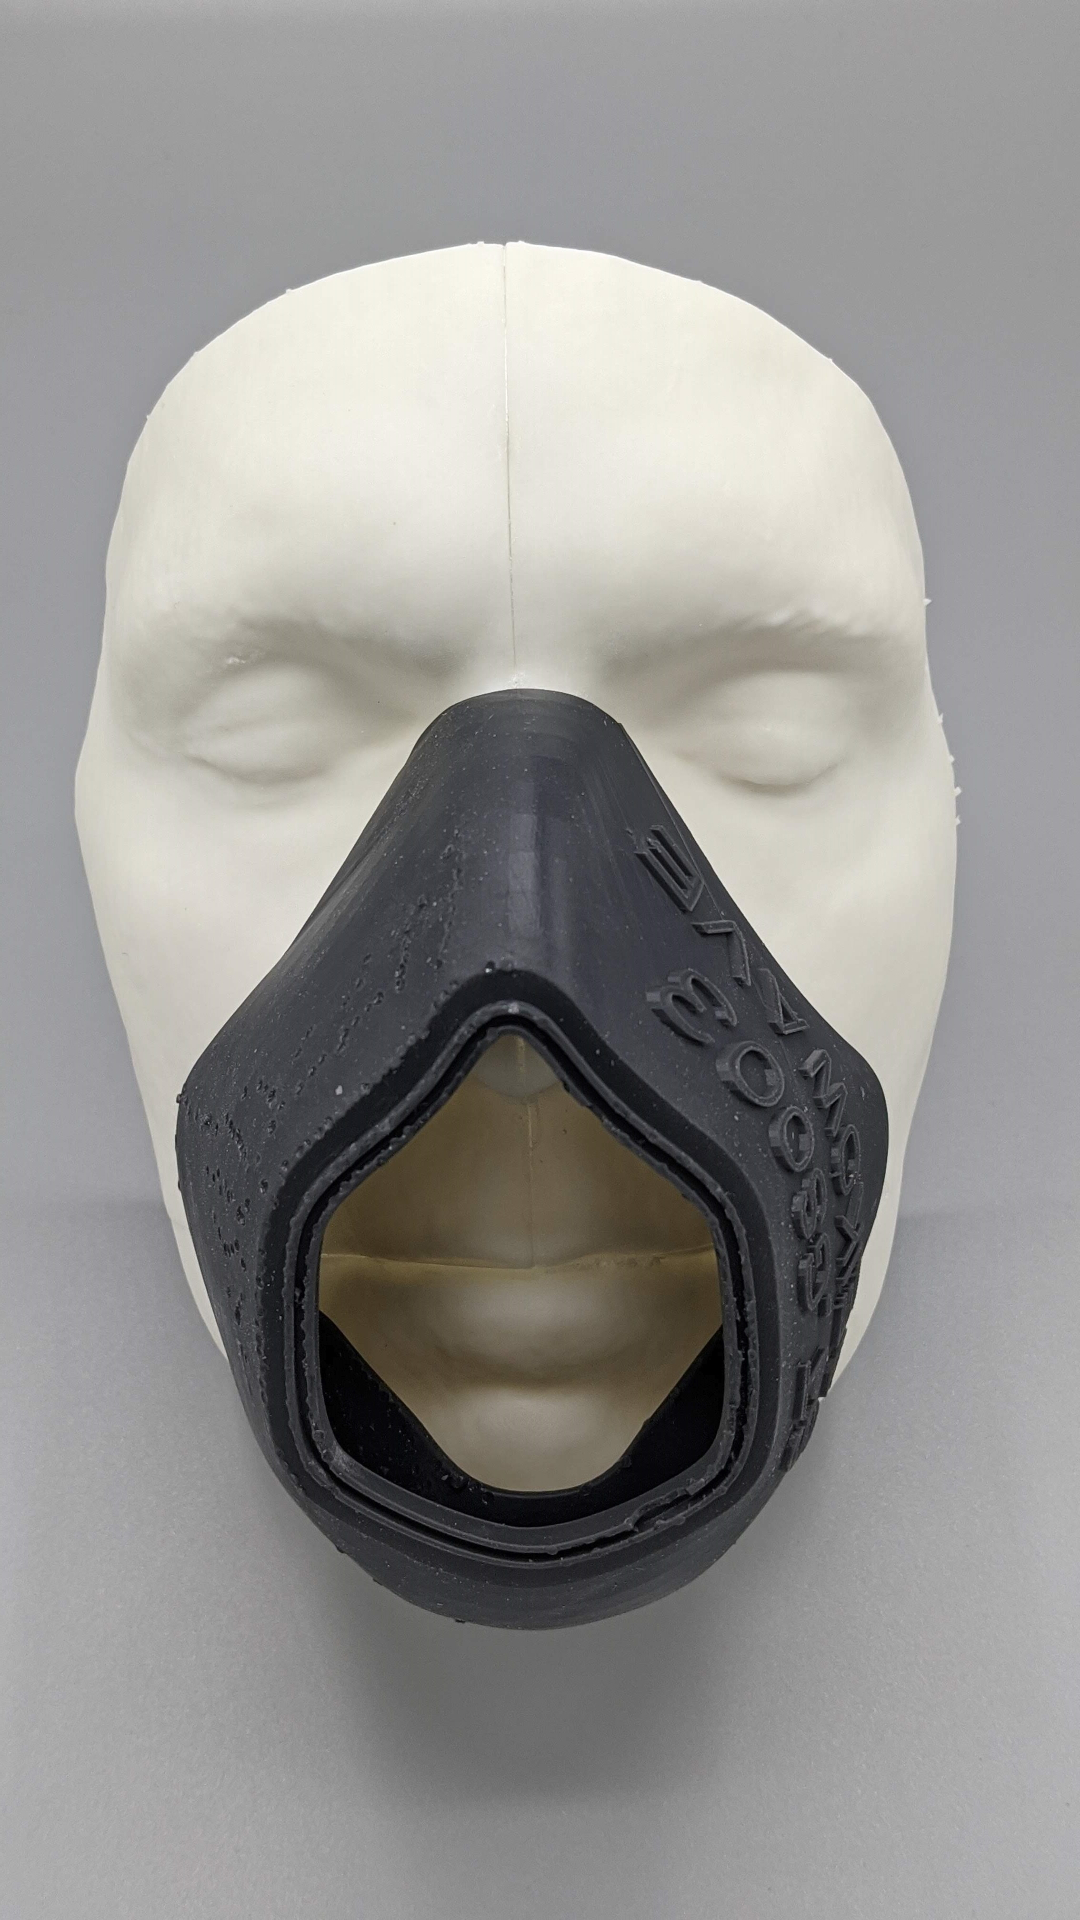 face mask and respirator